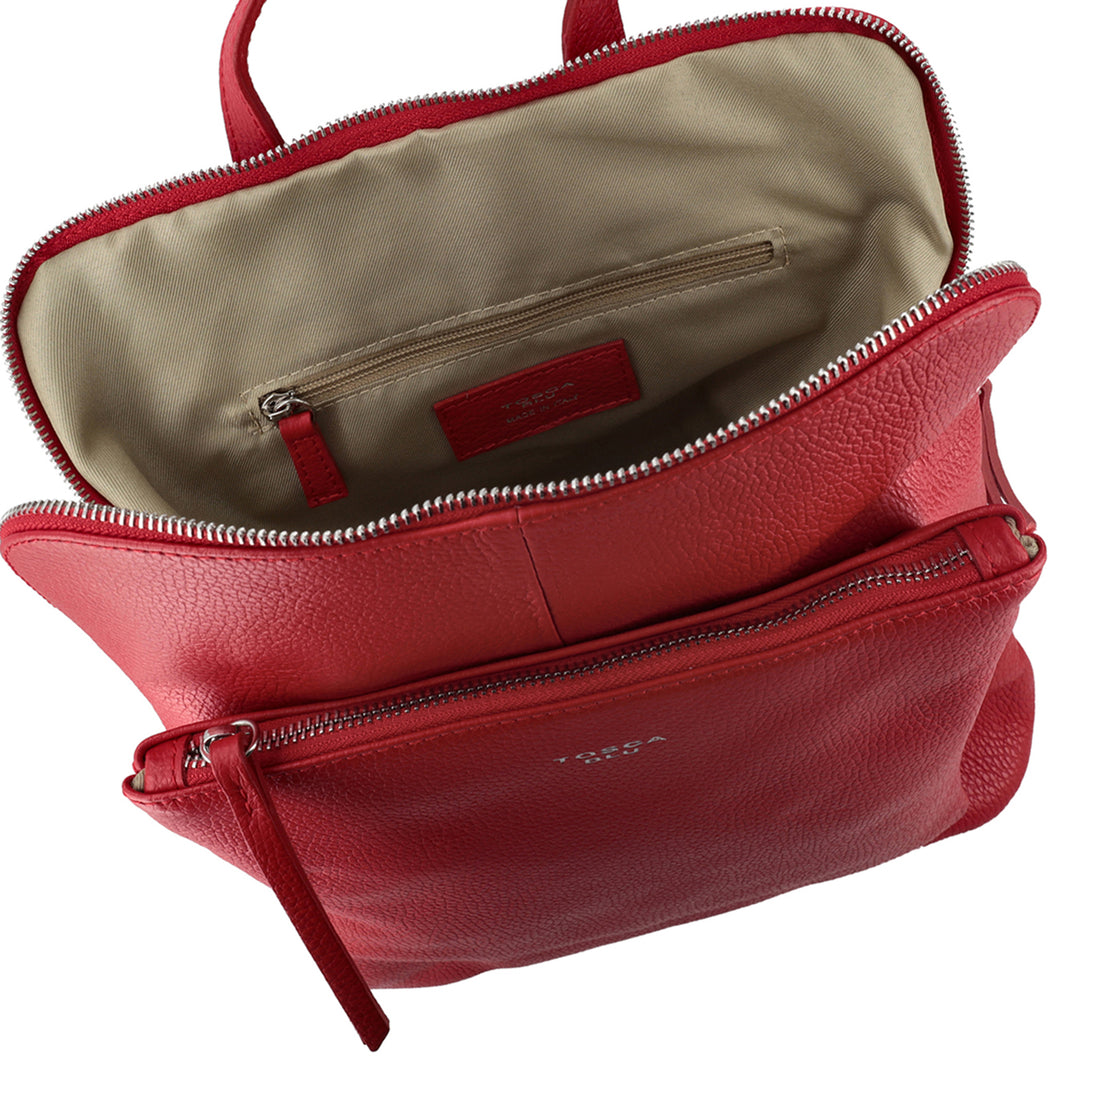 RED LEATHER BACKPACK WITH ZIPPER CLOSURE